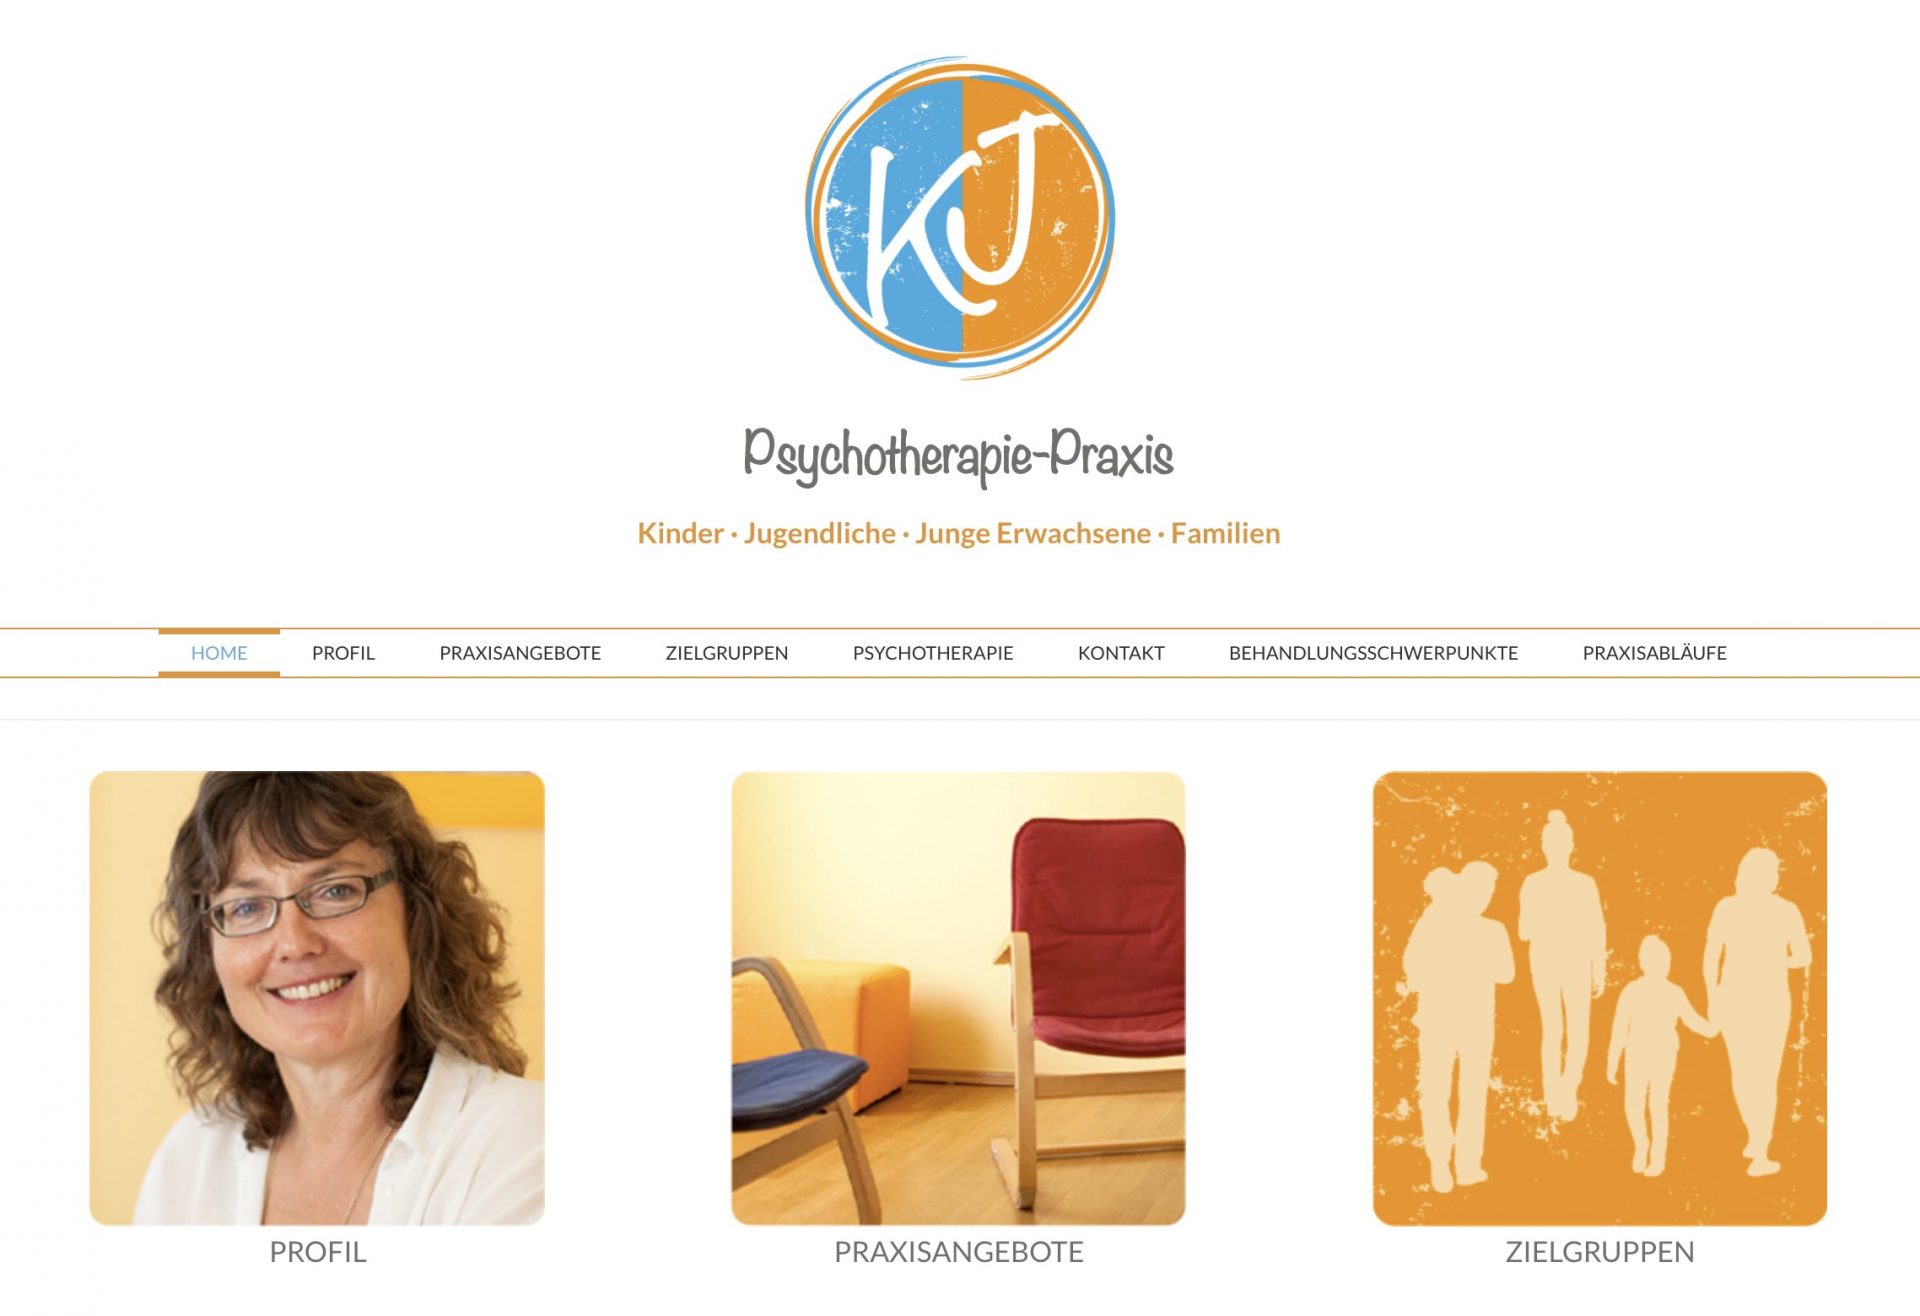 Website of a psychotherapy practice.